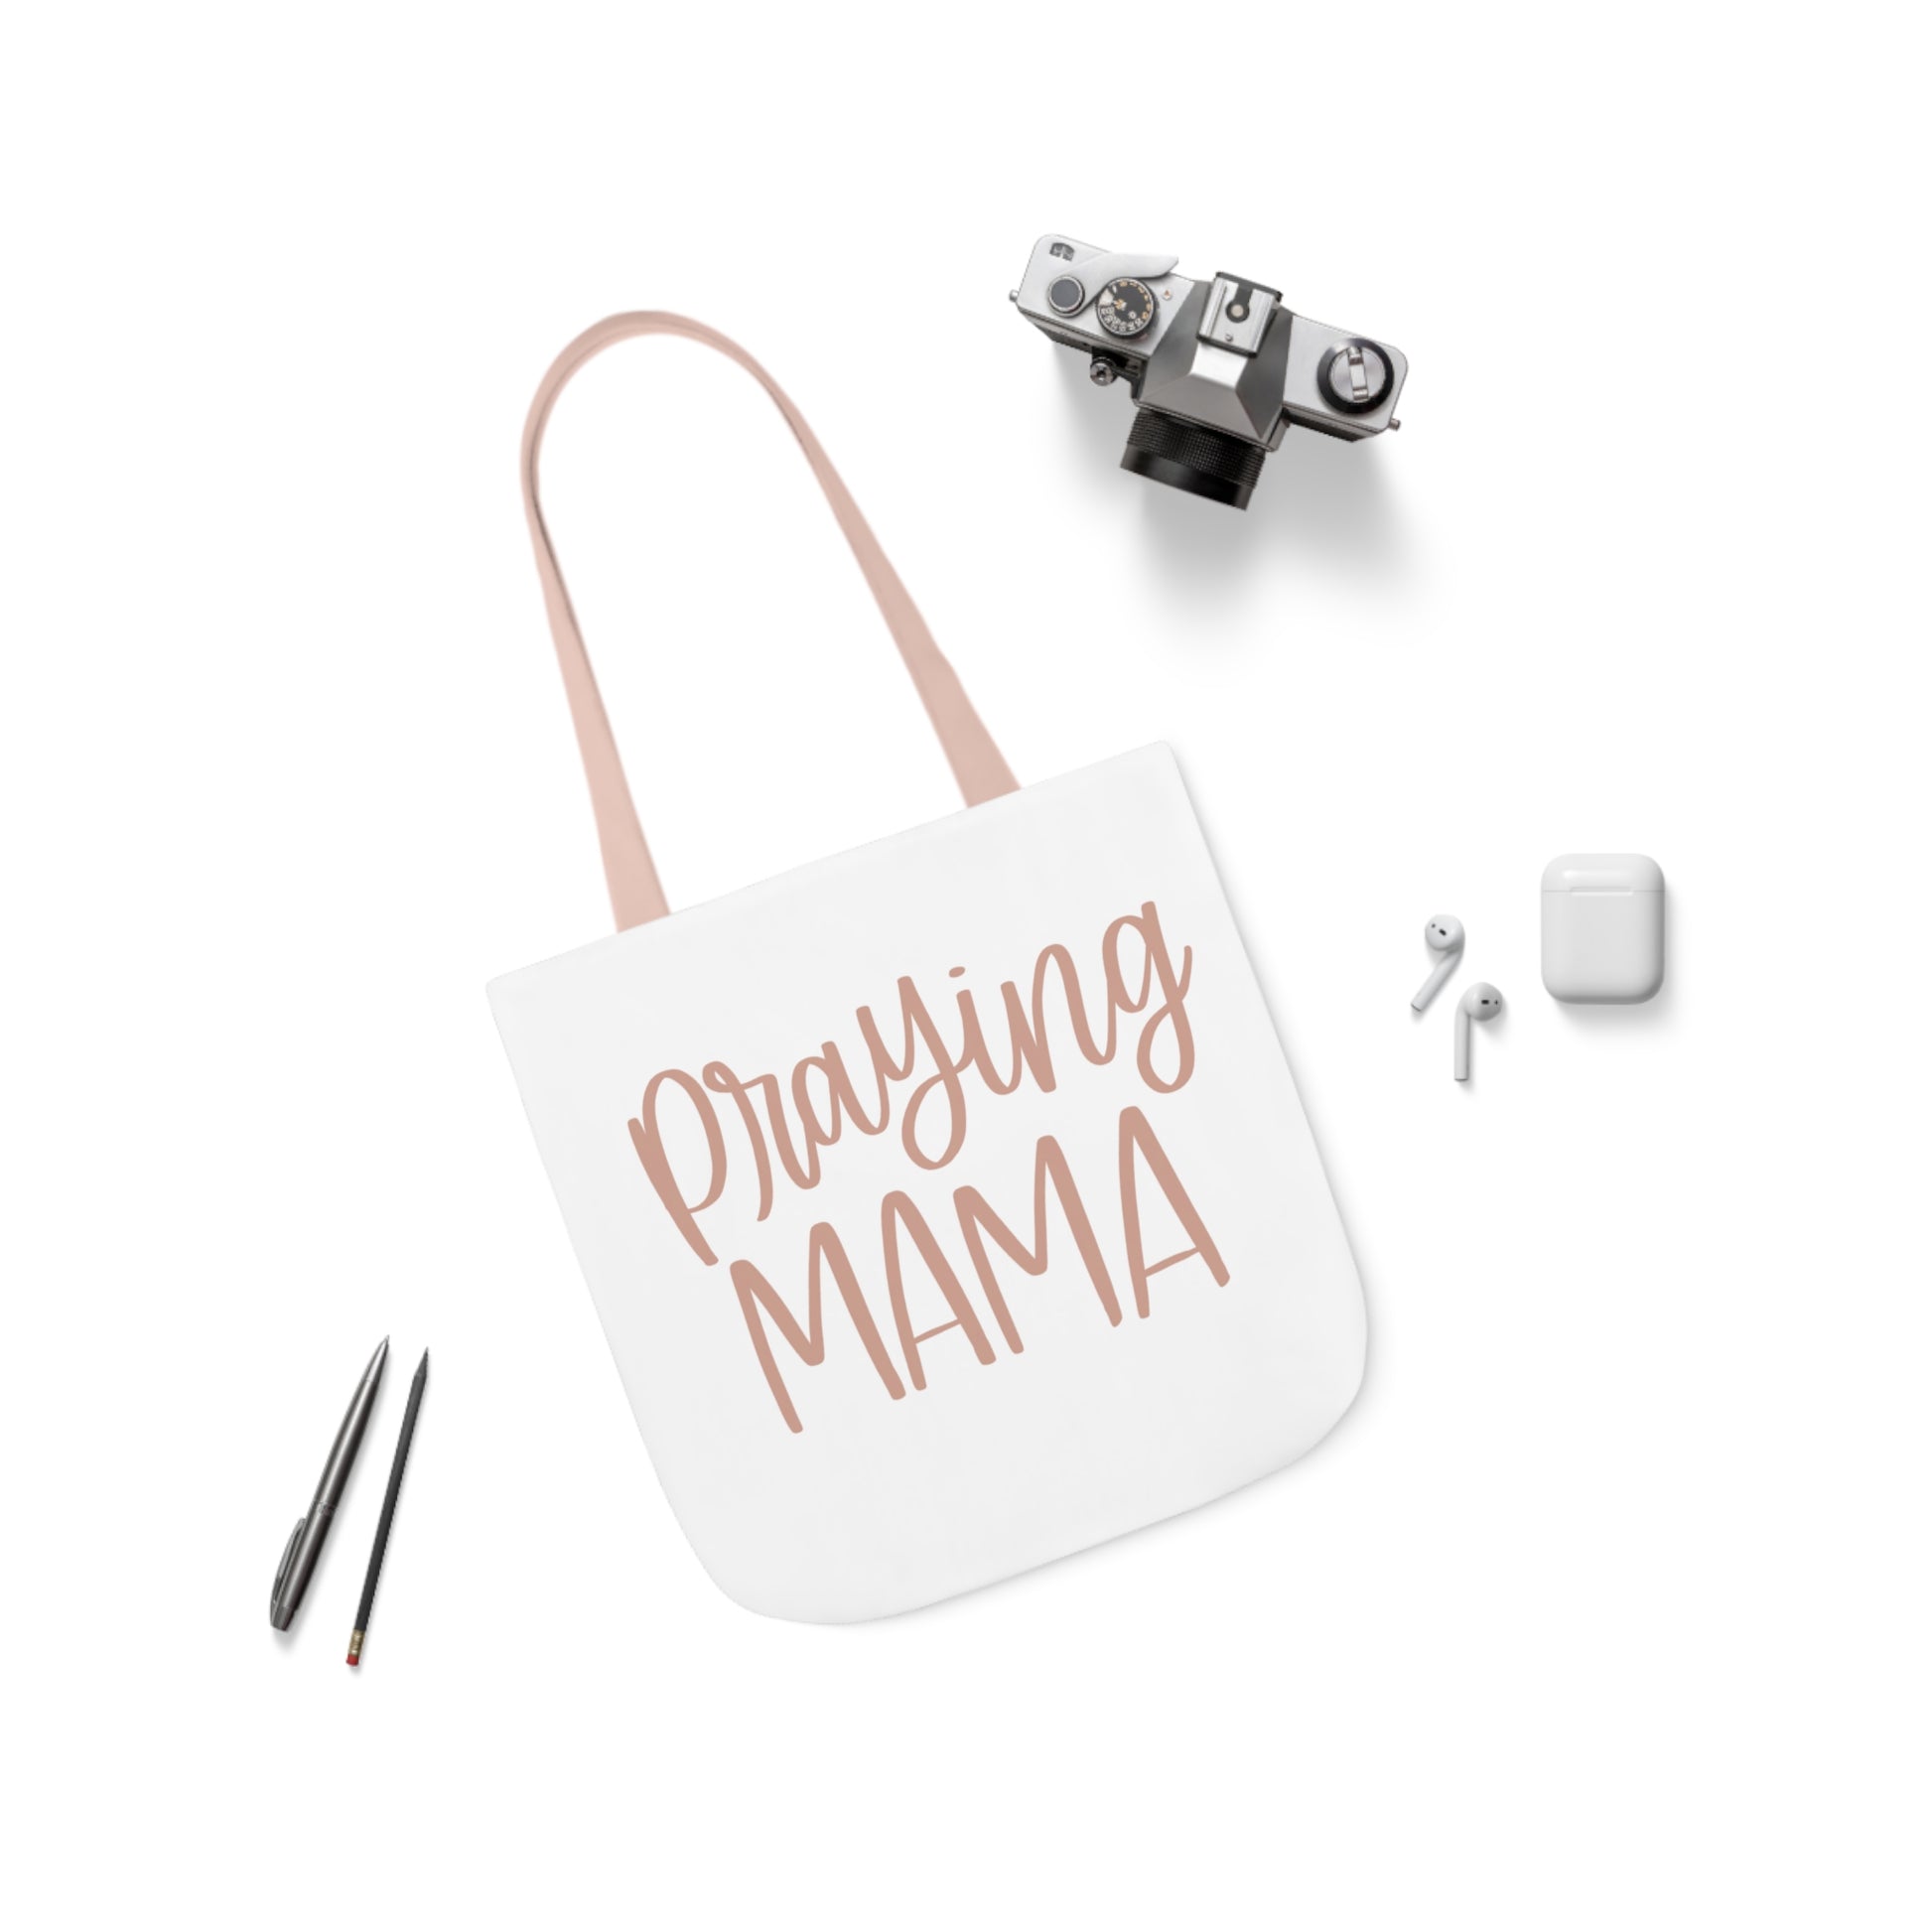 Praying Mama Tote Bag - Friends of the Faith